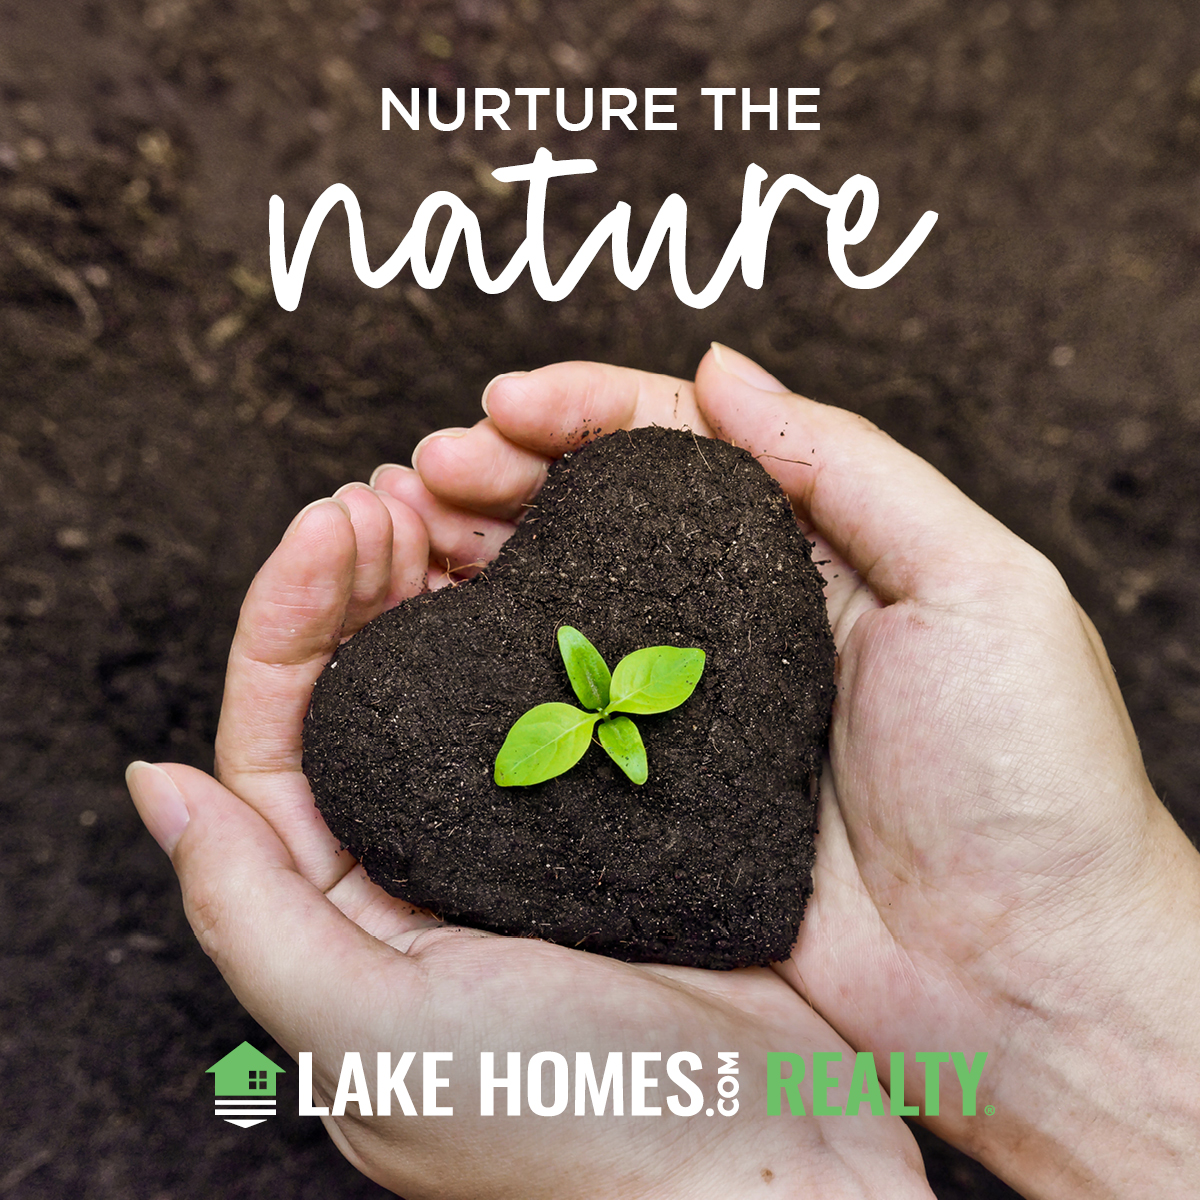 Plant a tree, pick up trash, and make a conscious choice. Every little bit helps.

#LakeHomesRealty #LakeLife #LakeLifestyle #LakeLiving #LakeHouse #LakeVibes #LakeFun #LakeLove #Lakeside #LifeontheLake #Outdoorliving #lakelove #kayak #canoe #onthewater #lifeonthelake #lake # ...